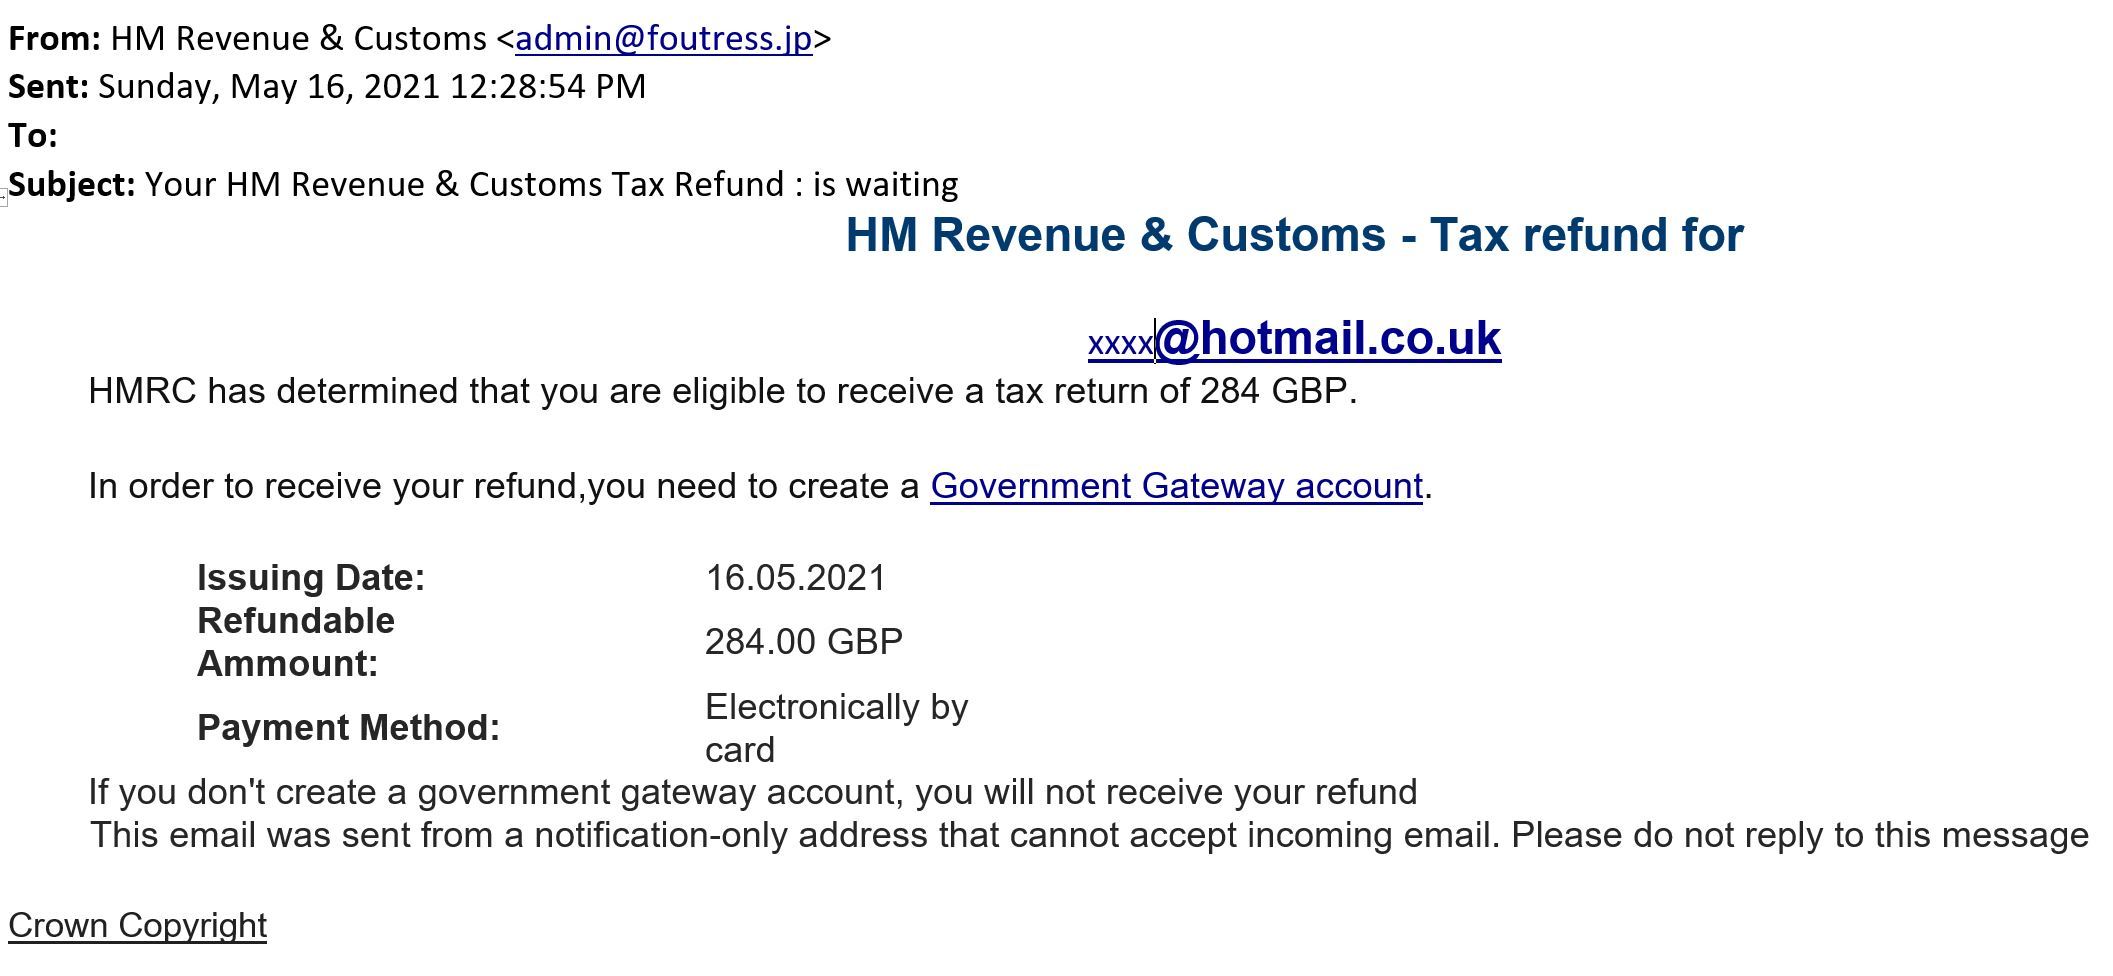 Images provided by HMRC